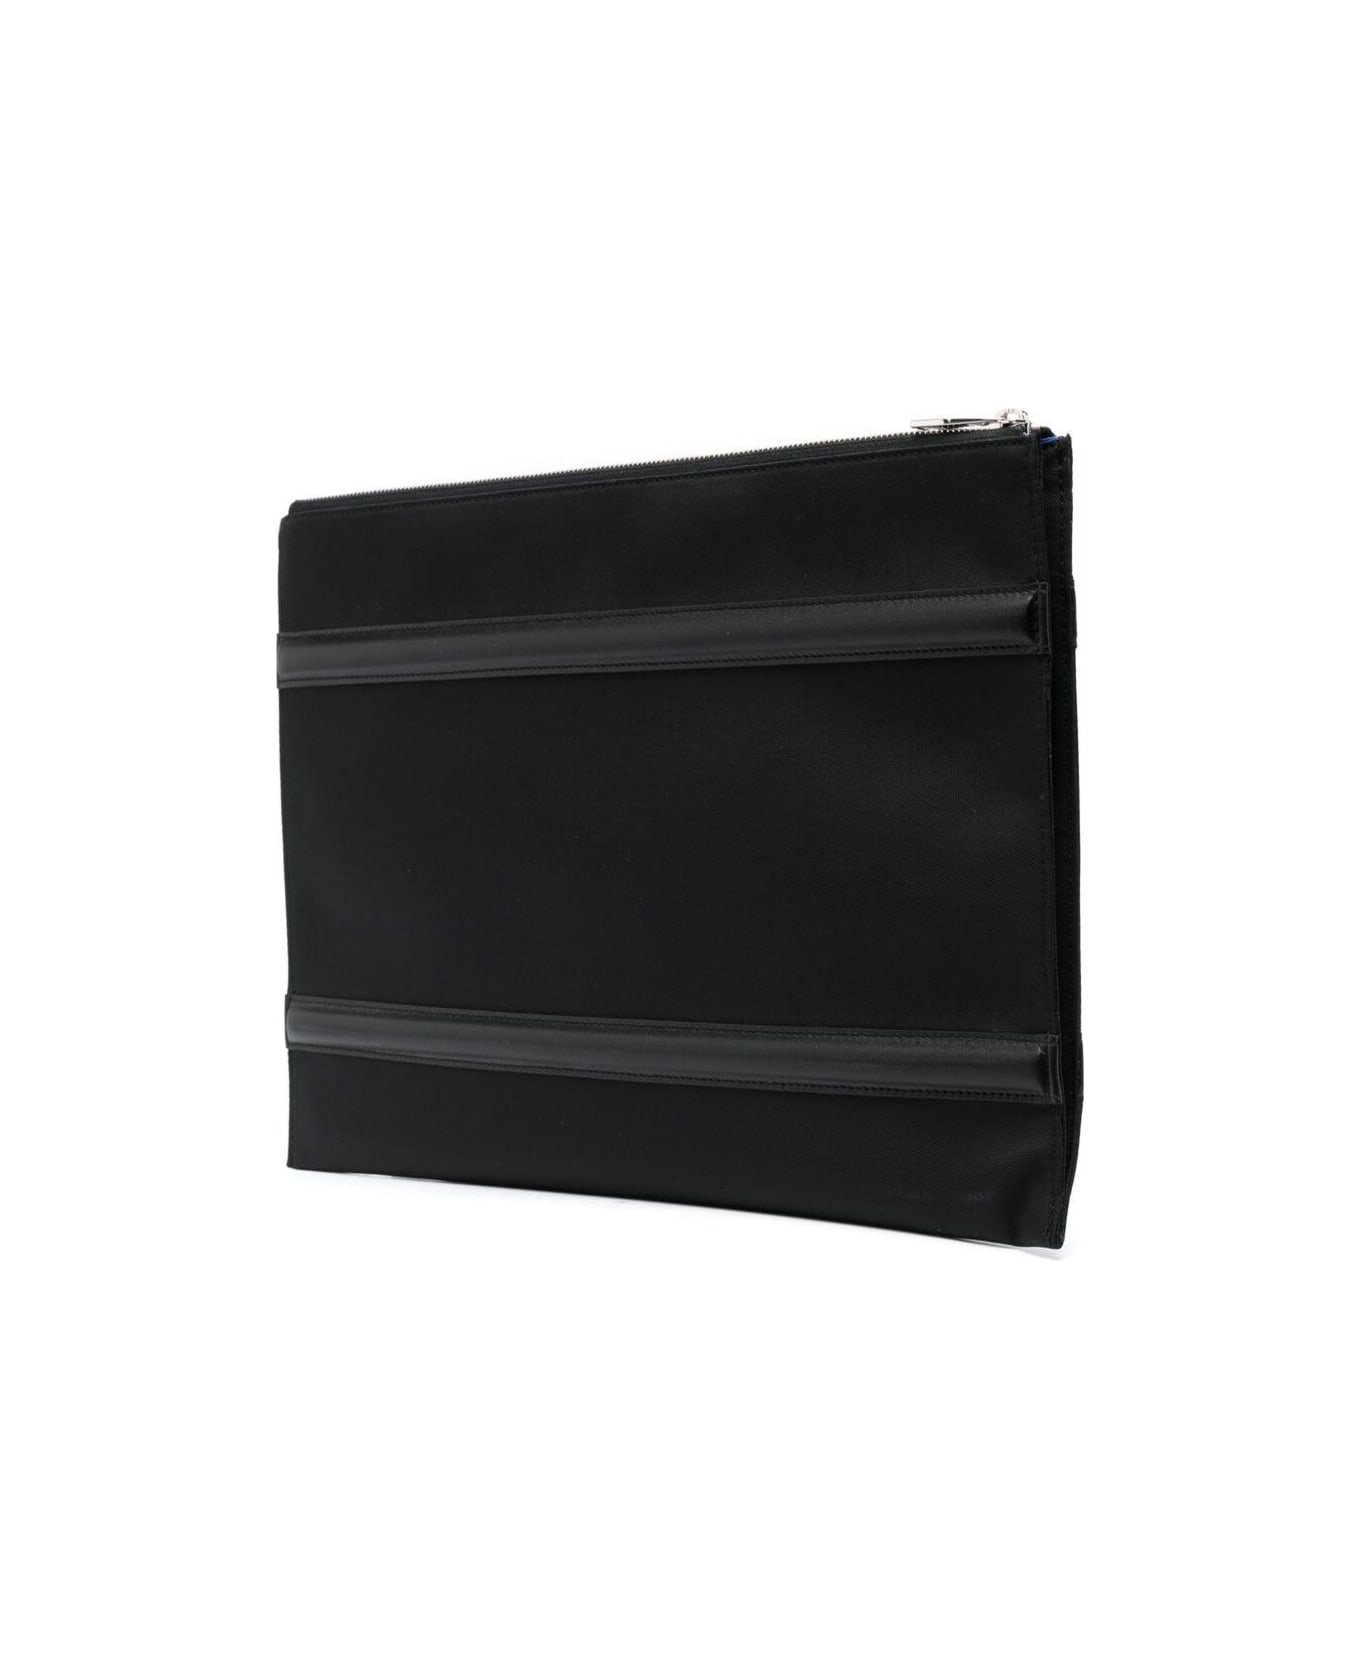 Alexander McQueen Black Pouch With Harness Detail In Nylon Man Alexander Mcqueen - Black